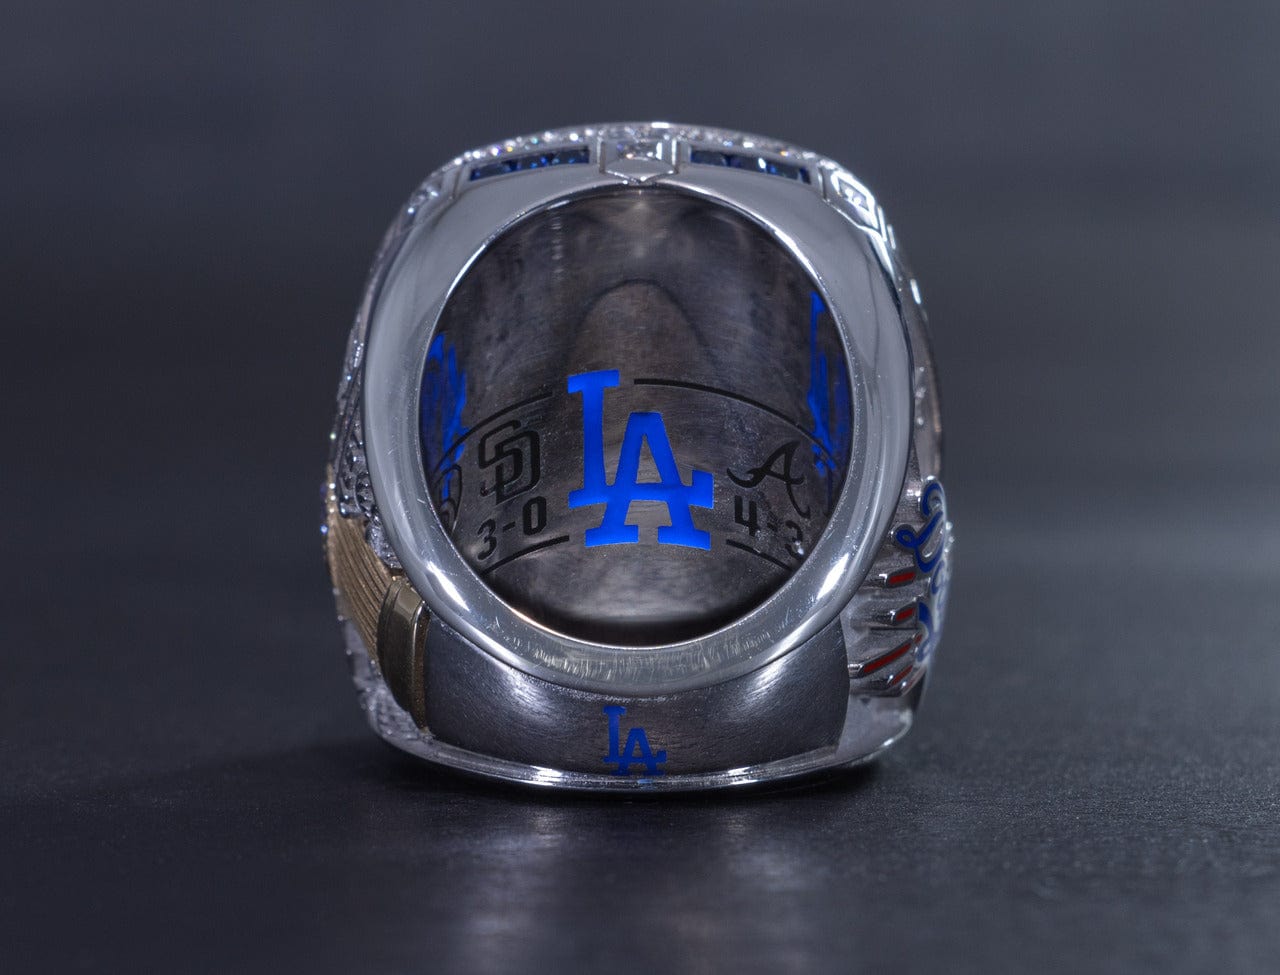 2020 Los Angeles Dodgers World Series Championship Ring and